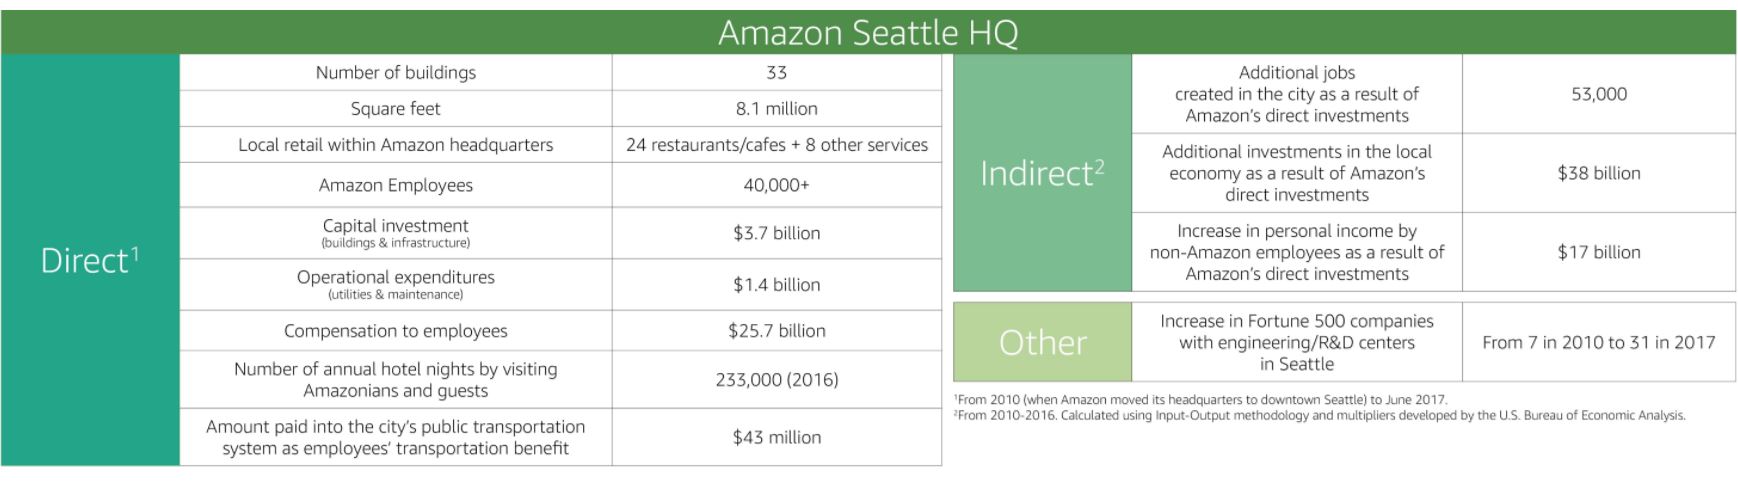 amazon seattle numbers and stats